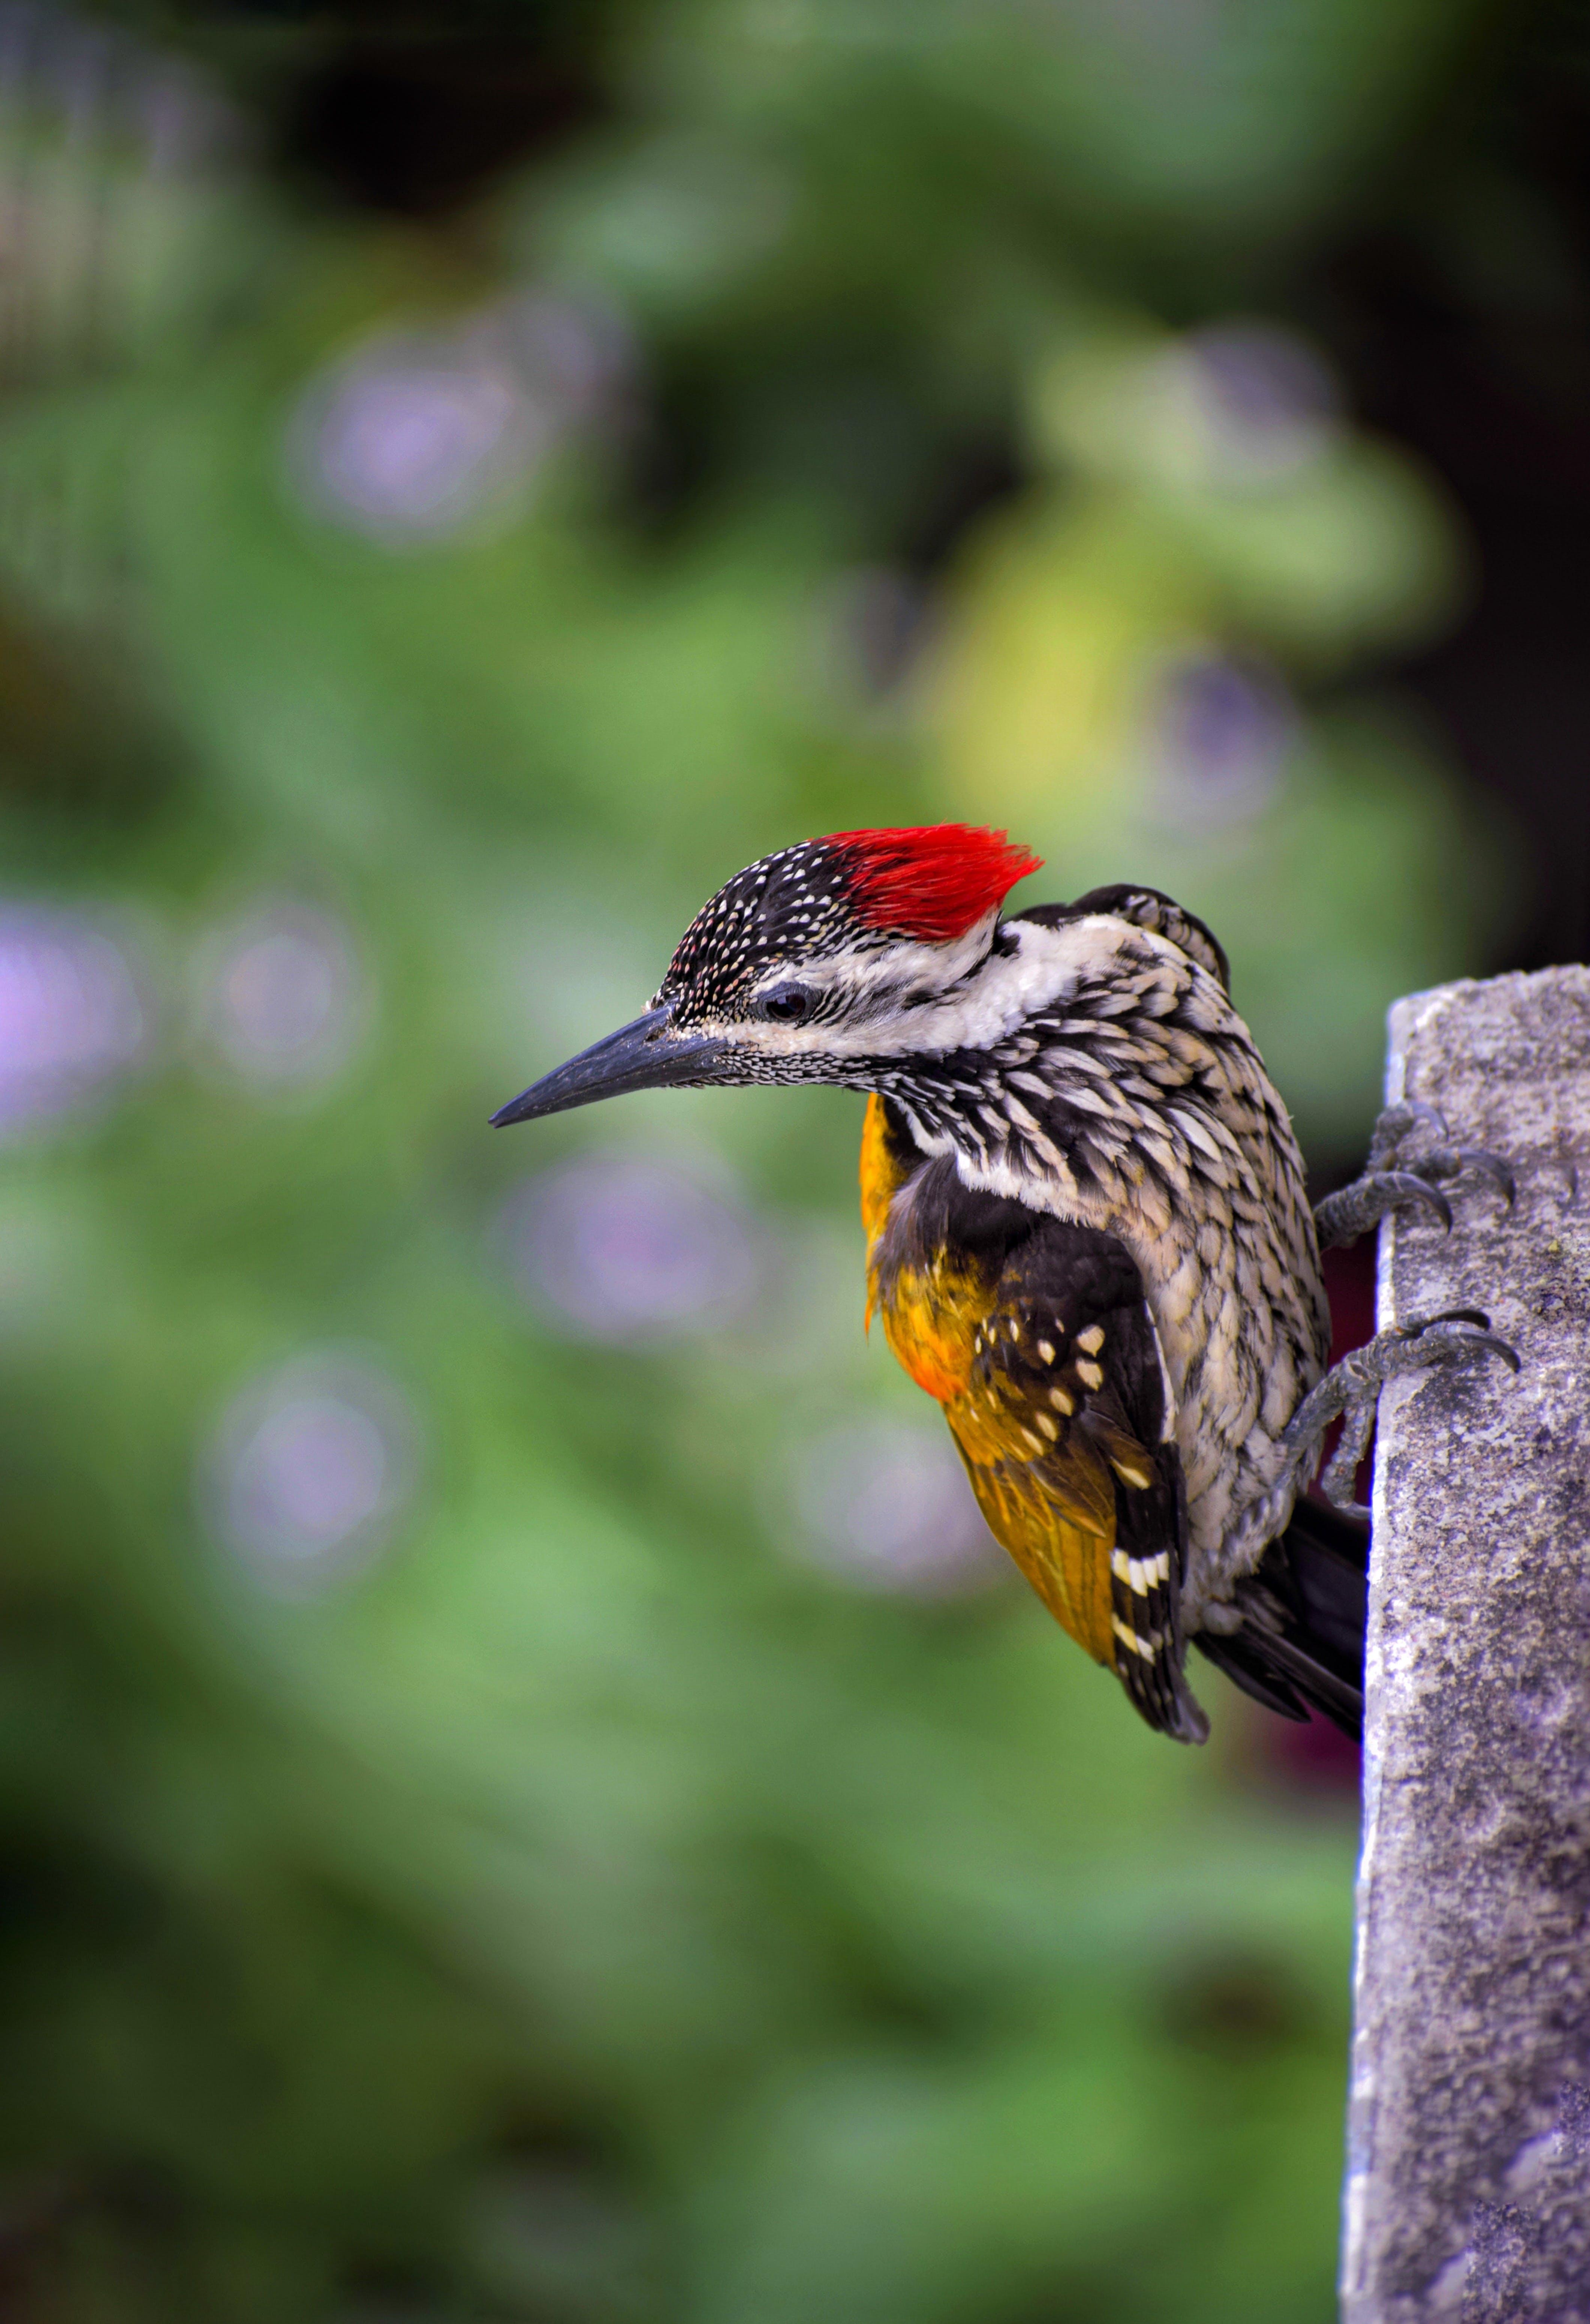 How many times does a woodpecker peck in one second? 